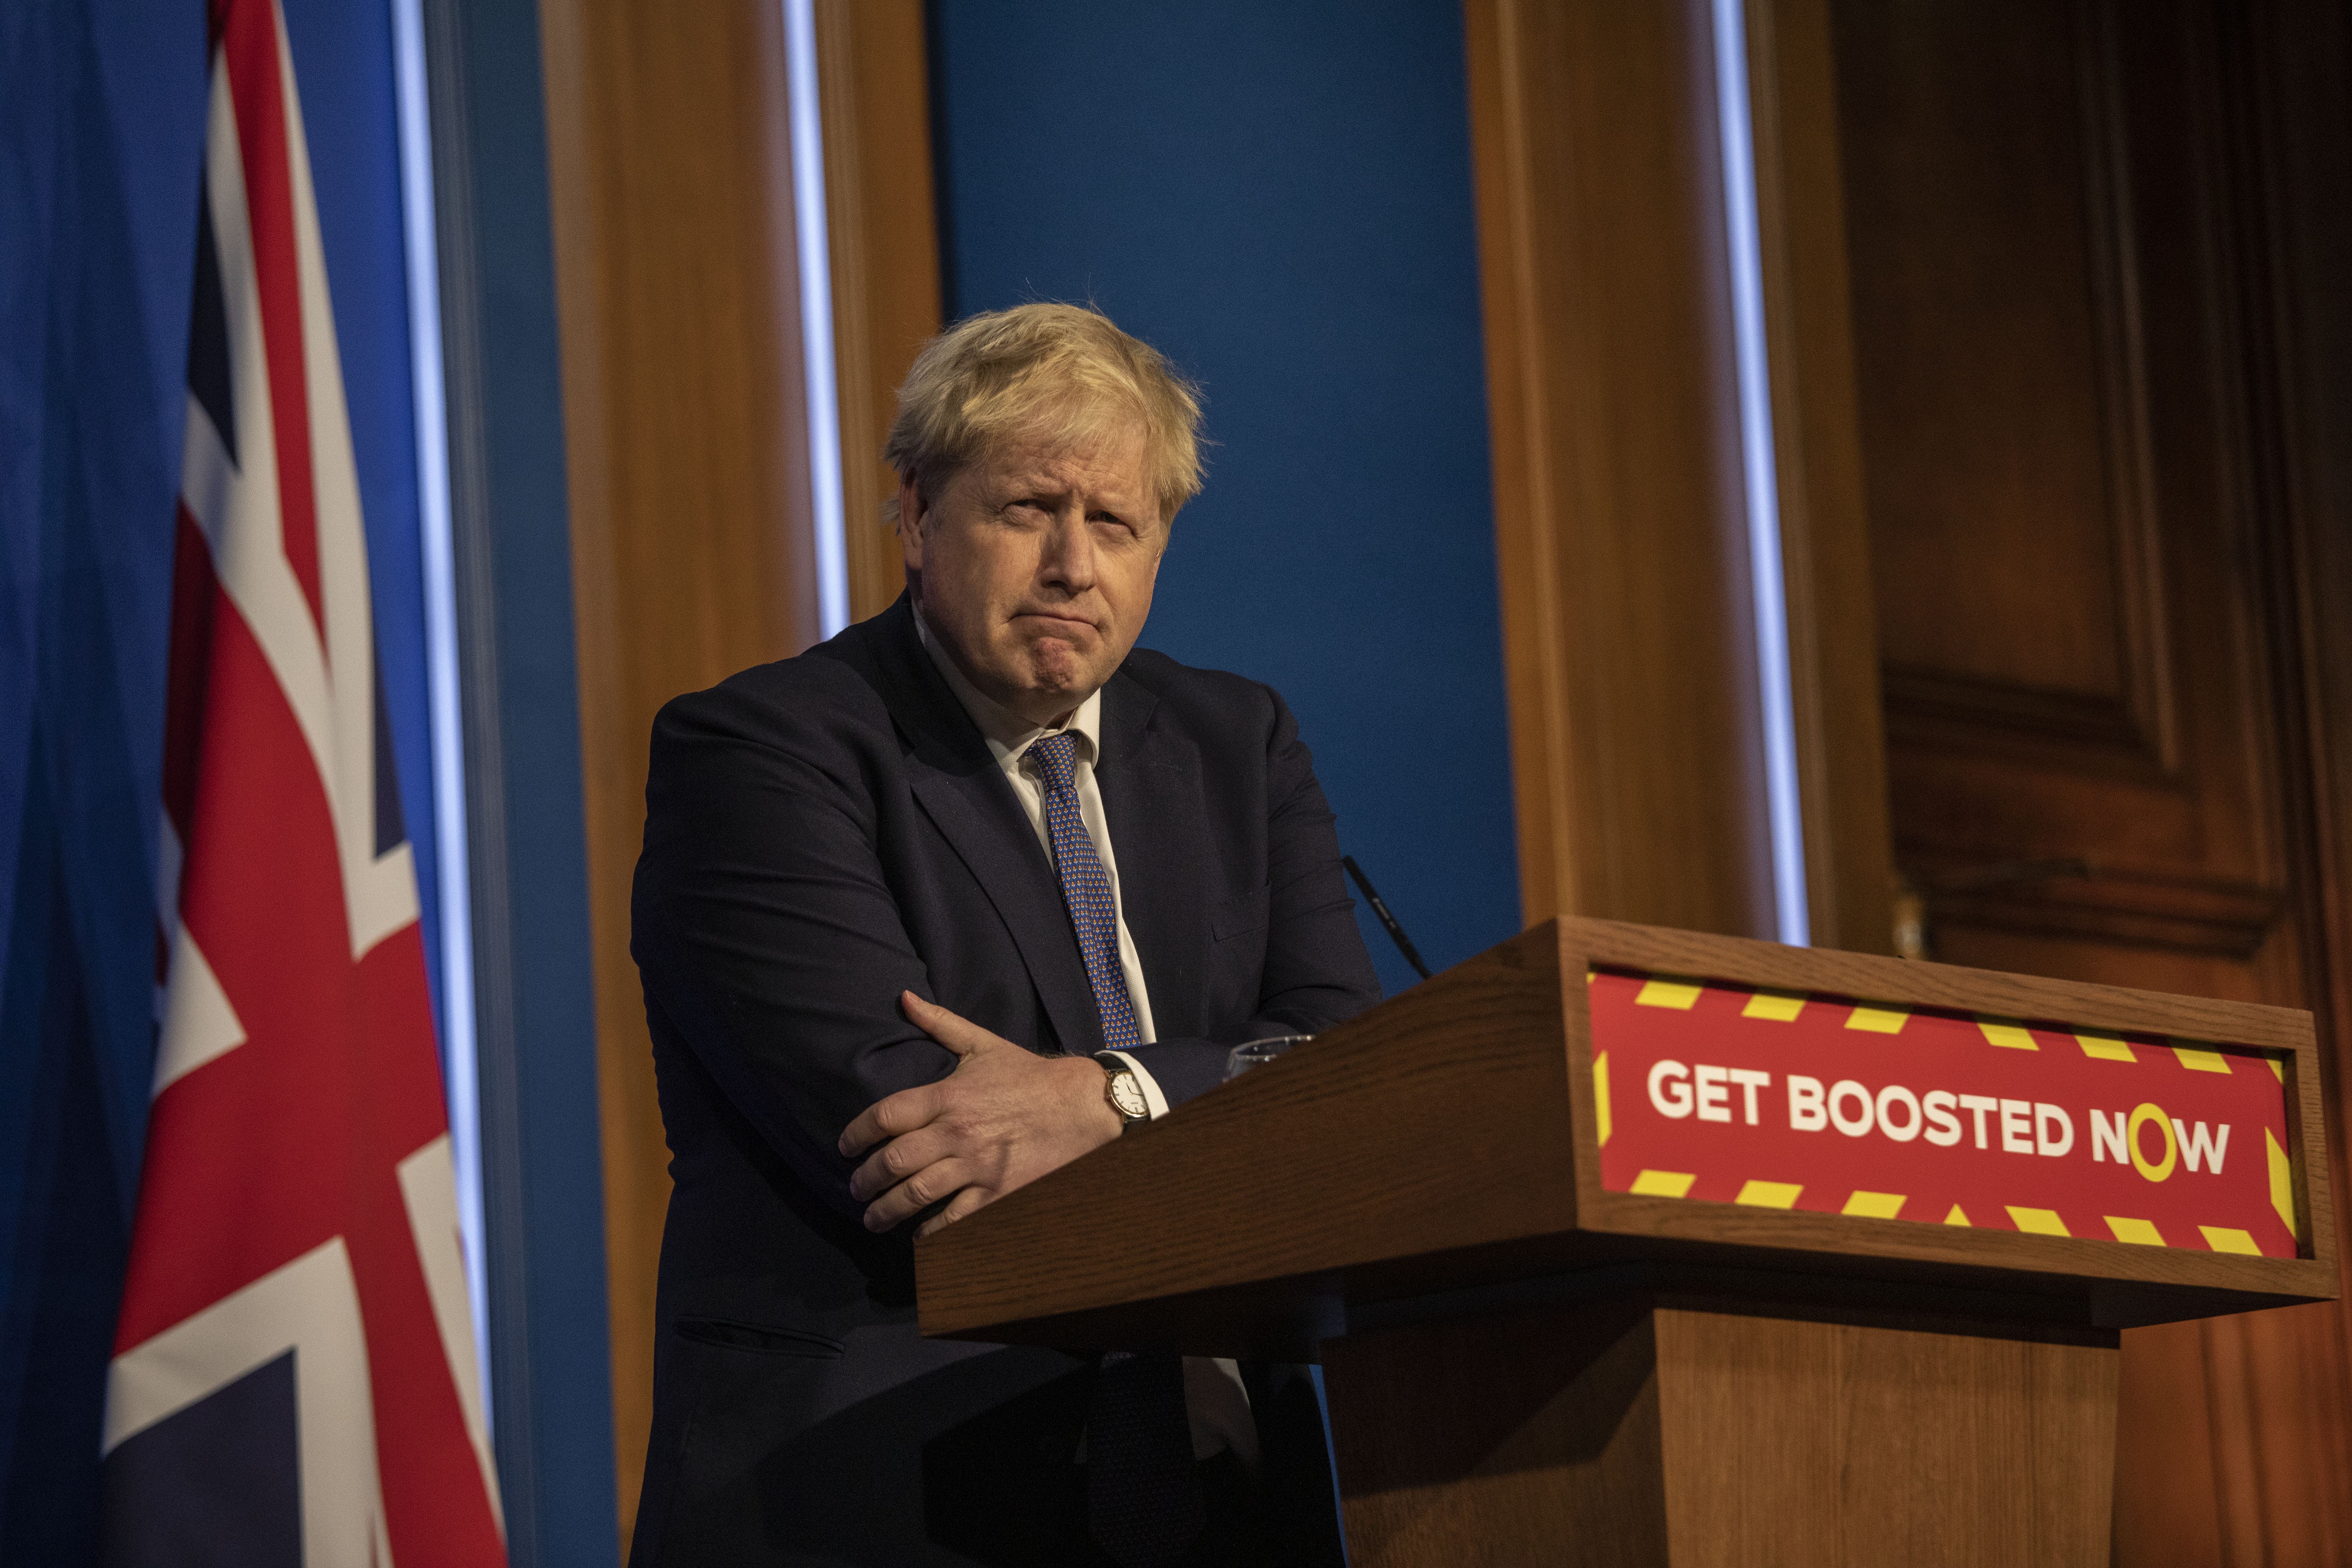 Who is in the running to be the next prime minister if Johnson goes?